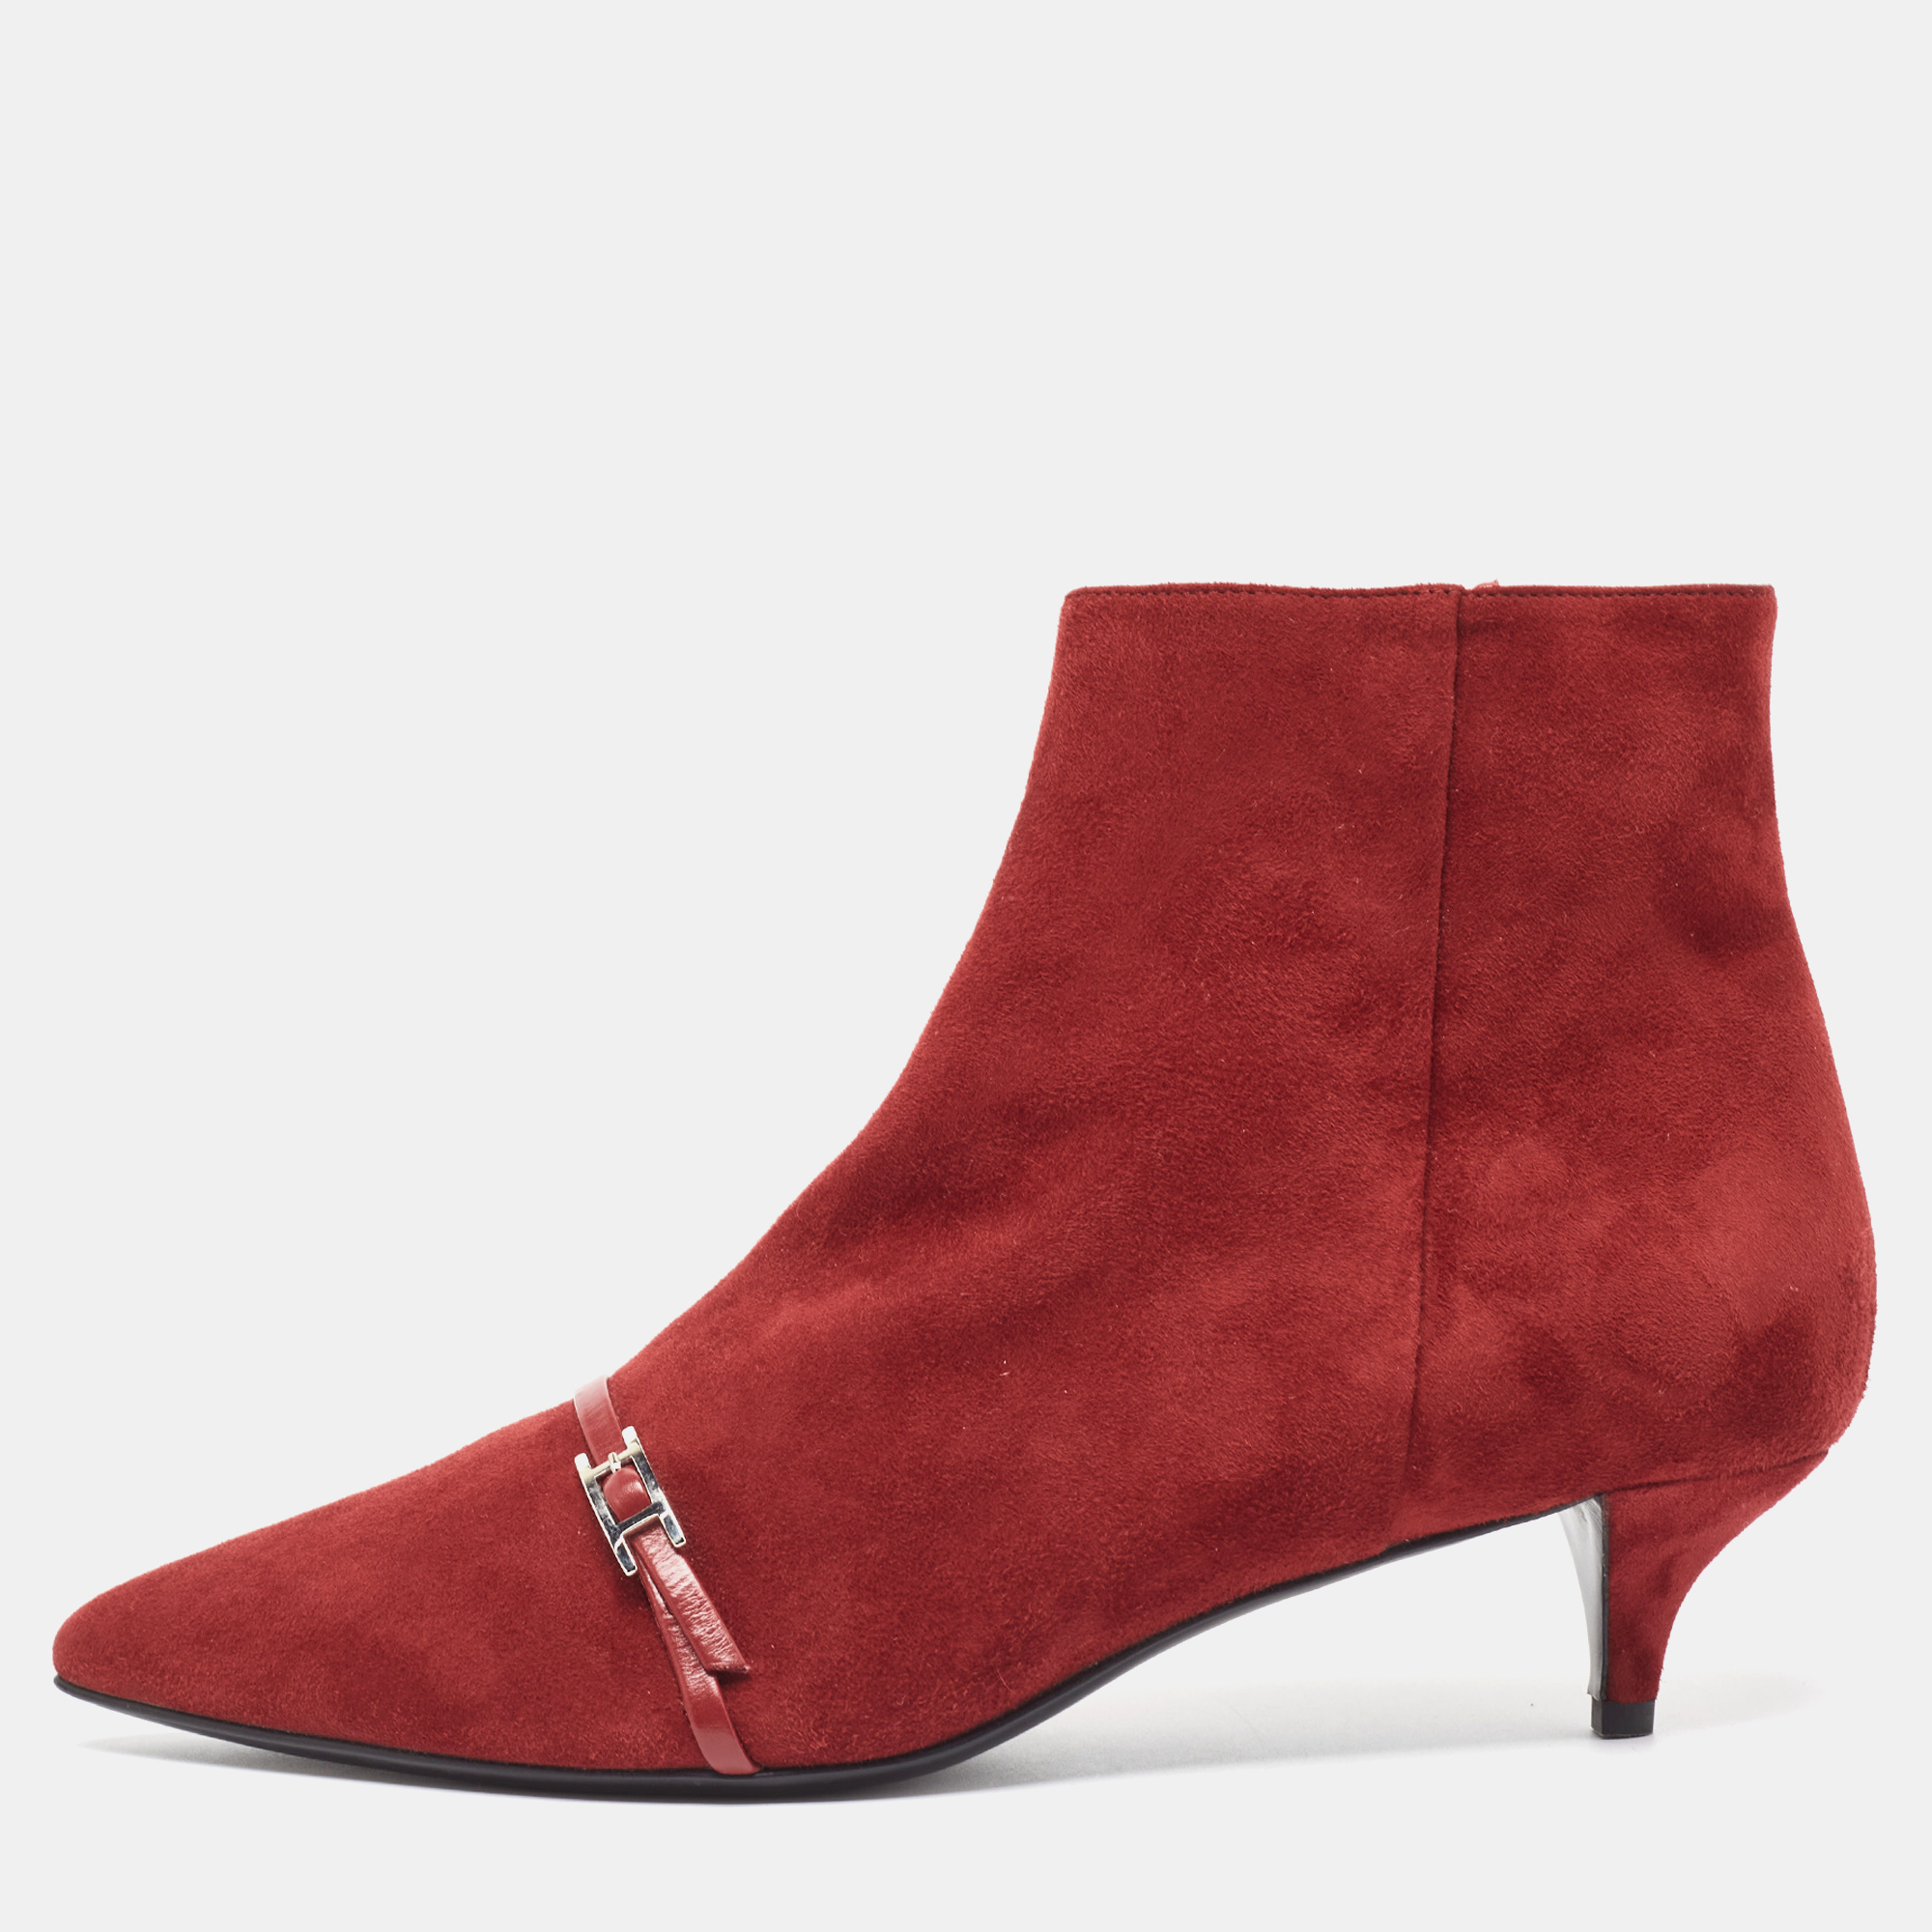 Hermes herm&egrave;s dark red suede ankle booties size 39